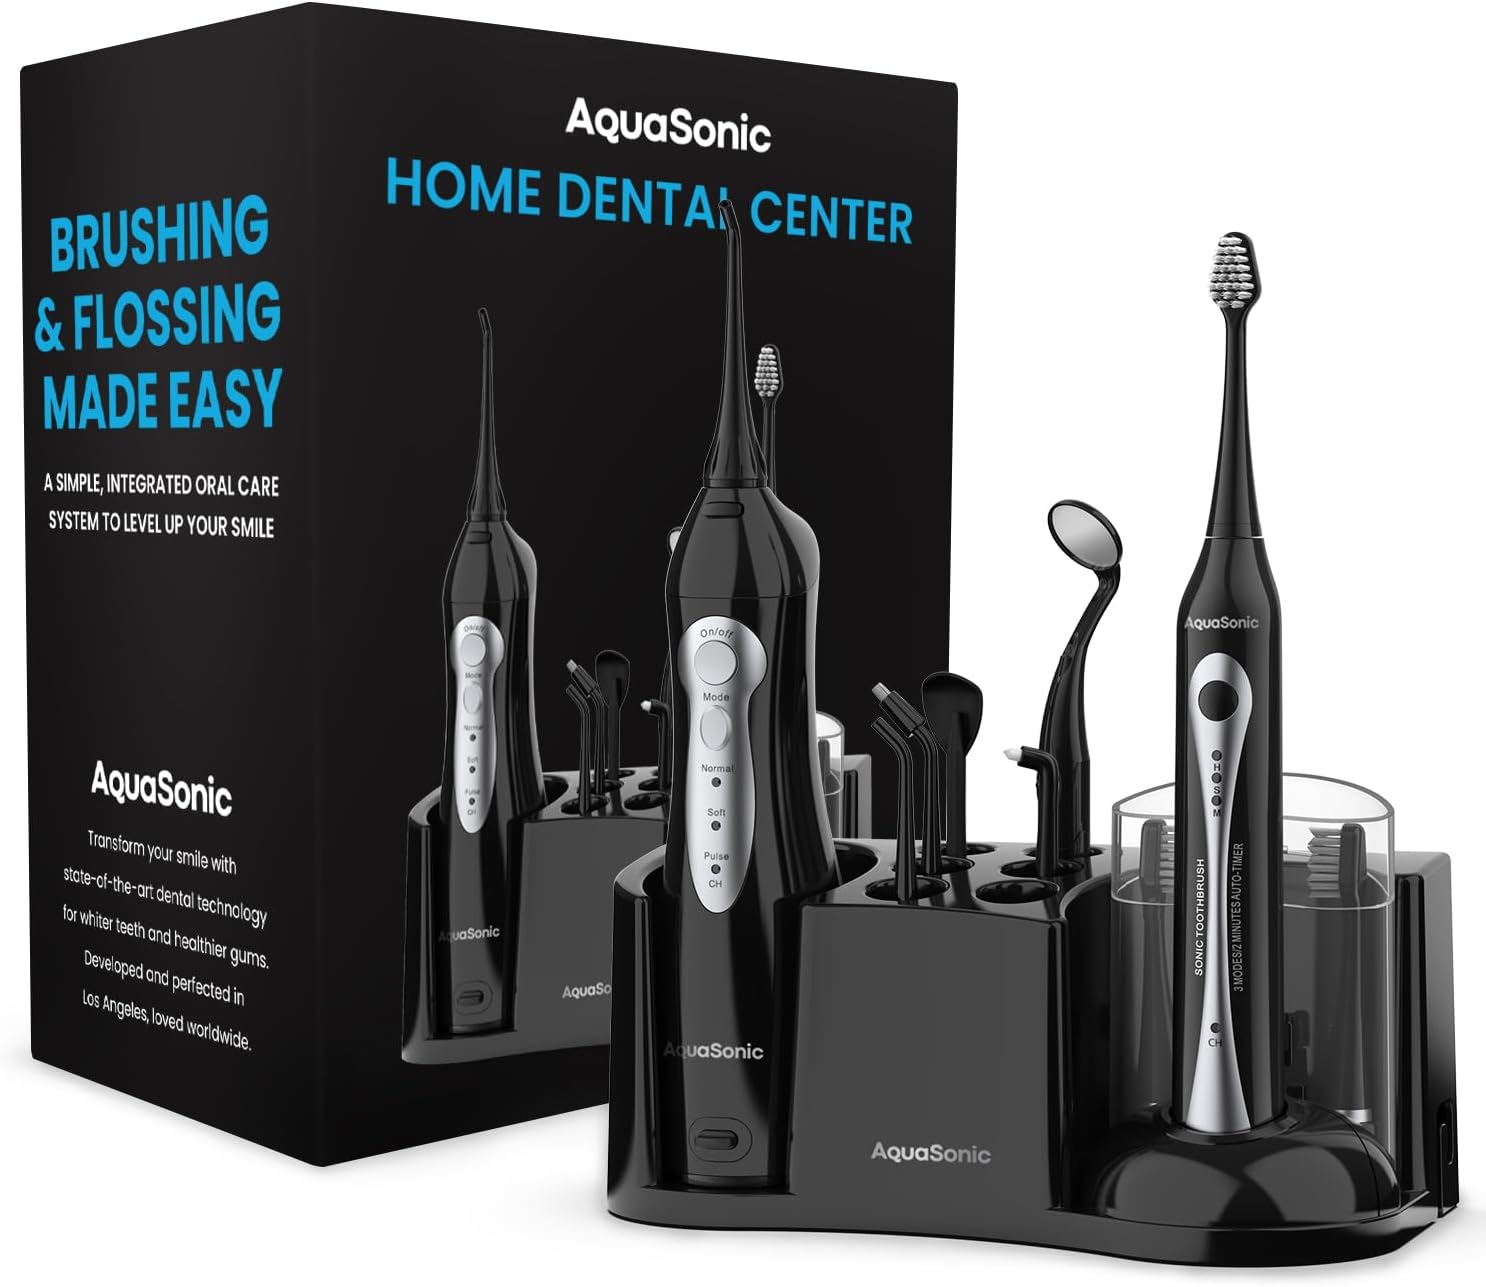 AquaSonic Home Dental Center Rechargeable Power Toothbrush & Smart Water Flosser - Complete Family Oral Care System - 10 Attachments and Tips Included - Various Modes & Timers (Black)